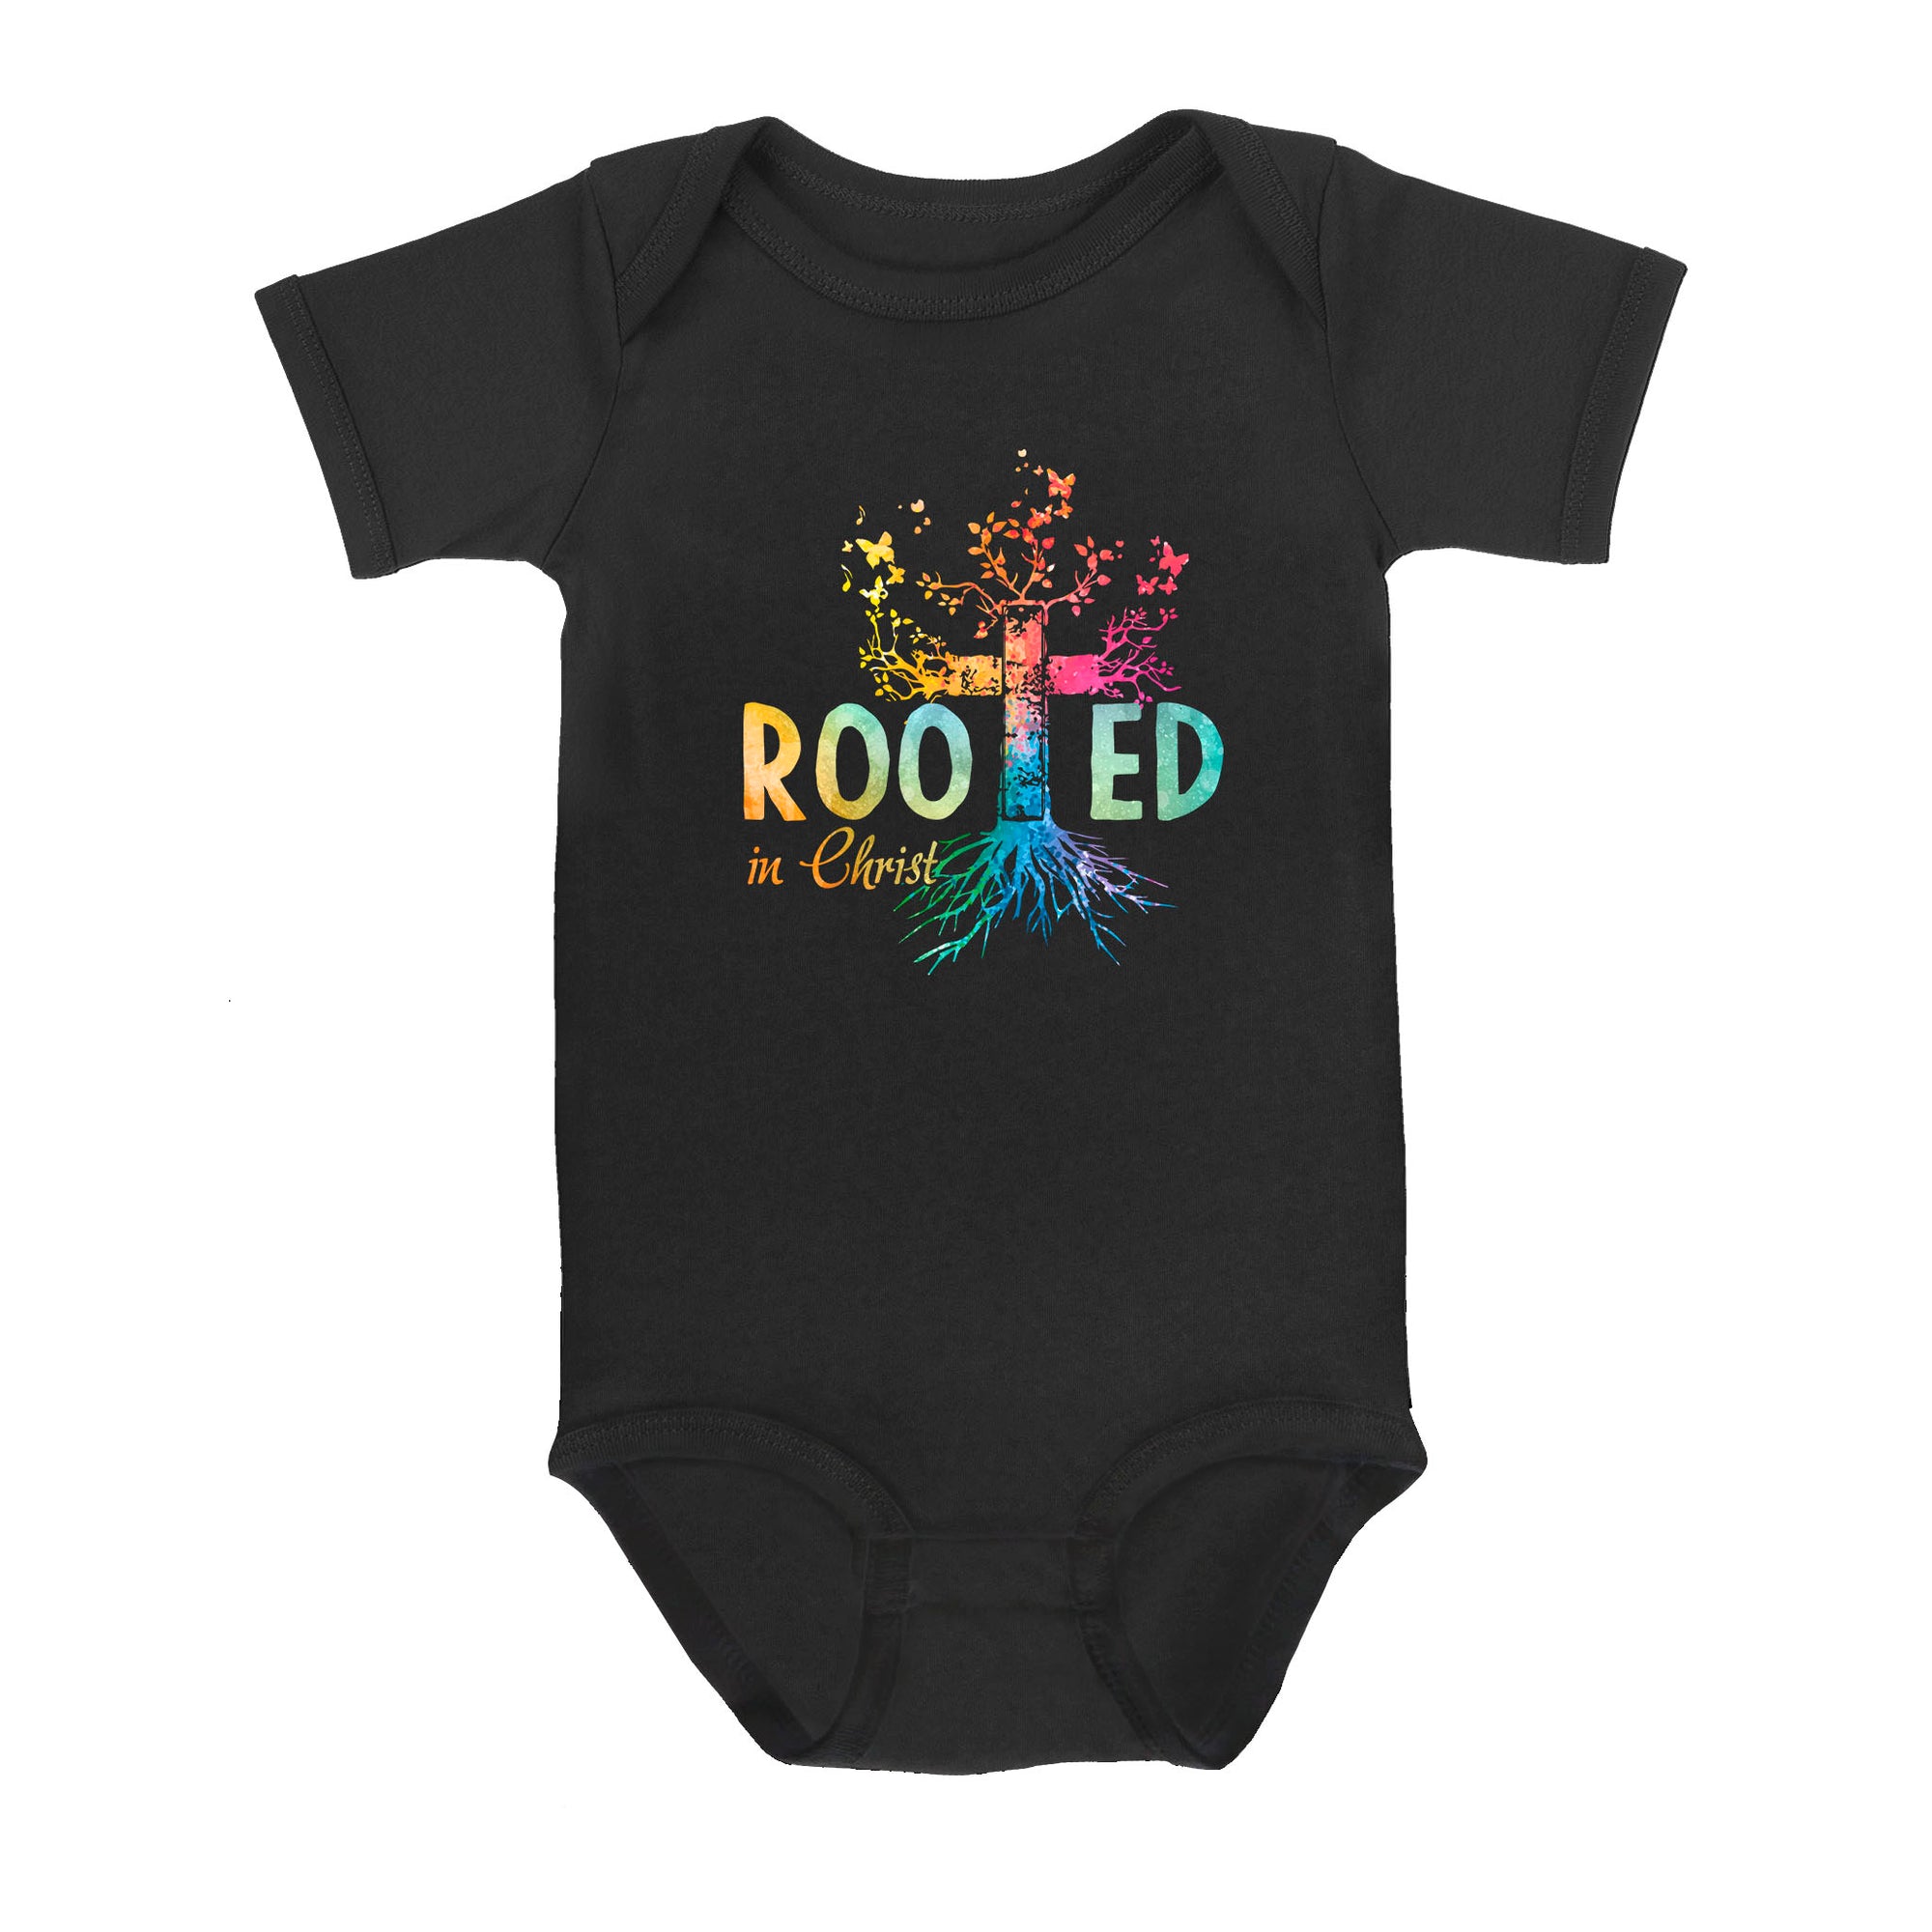 Rooted In Christ - Baby Onesie